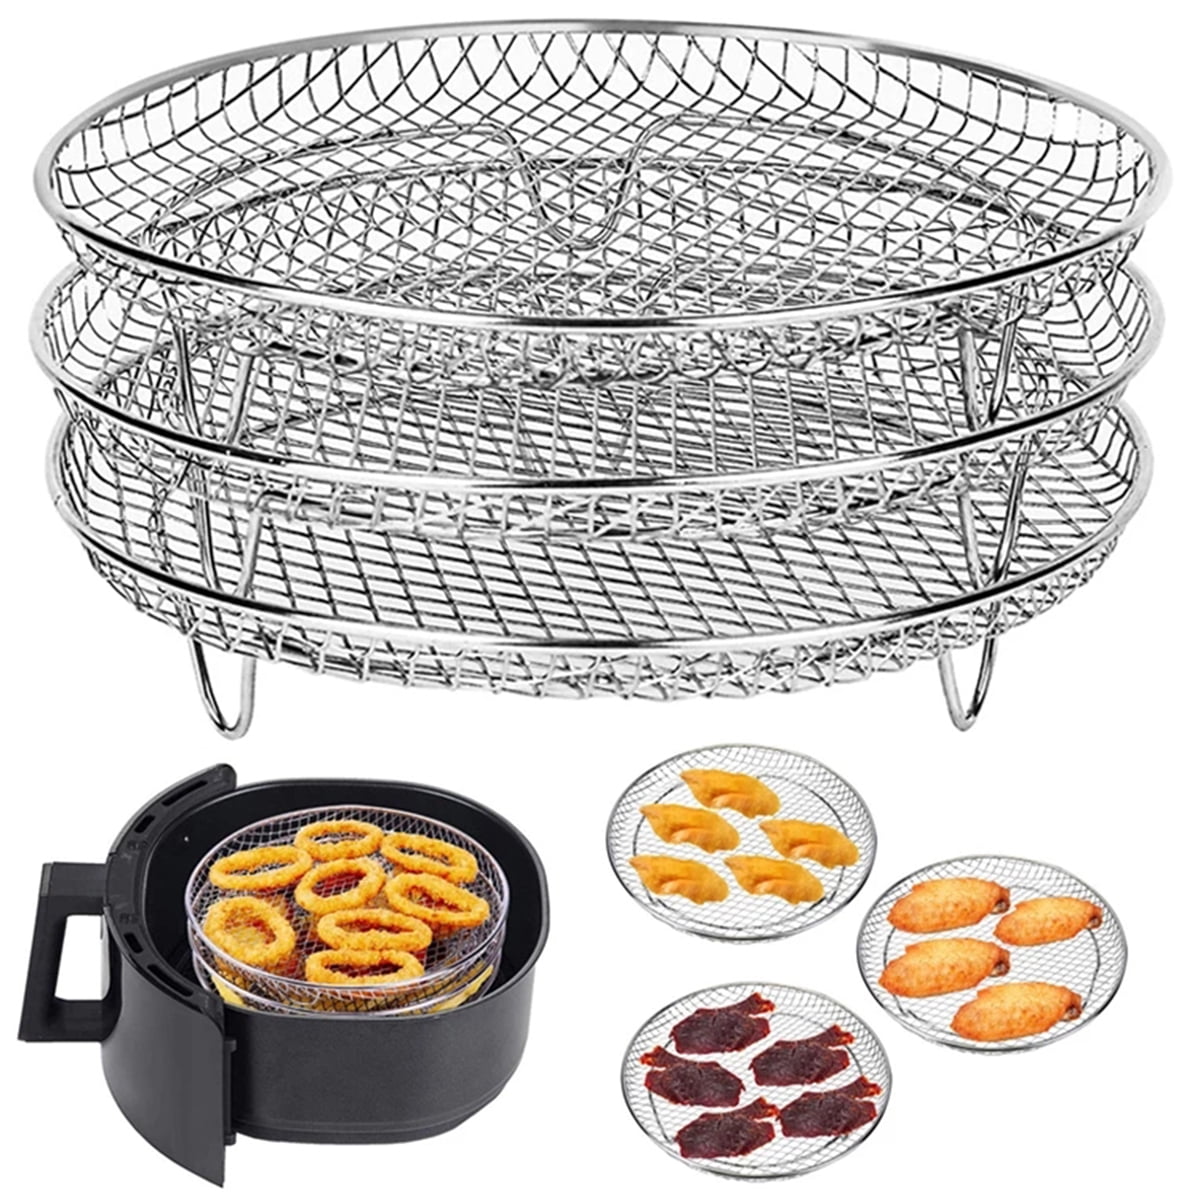 ROBOT-GXG Stainless Steel Dehydrator Rack 5-layer Air Fryer Stand Pressure  Cooker Accessories Replacement for Ninja Foodi 